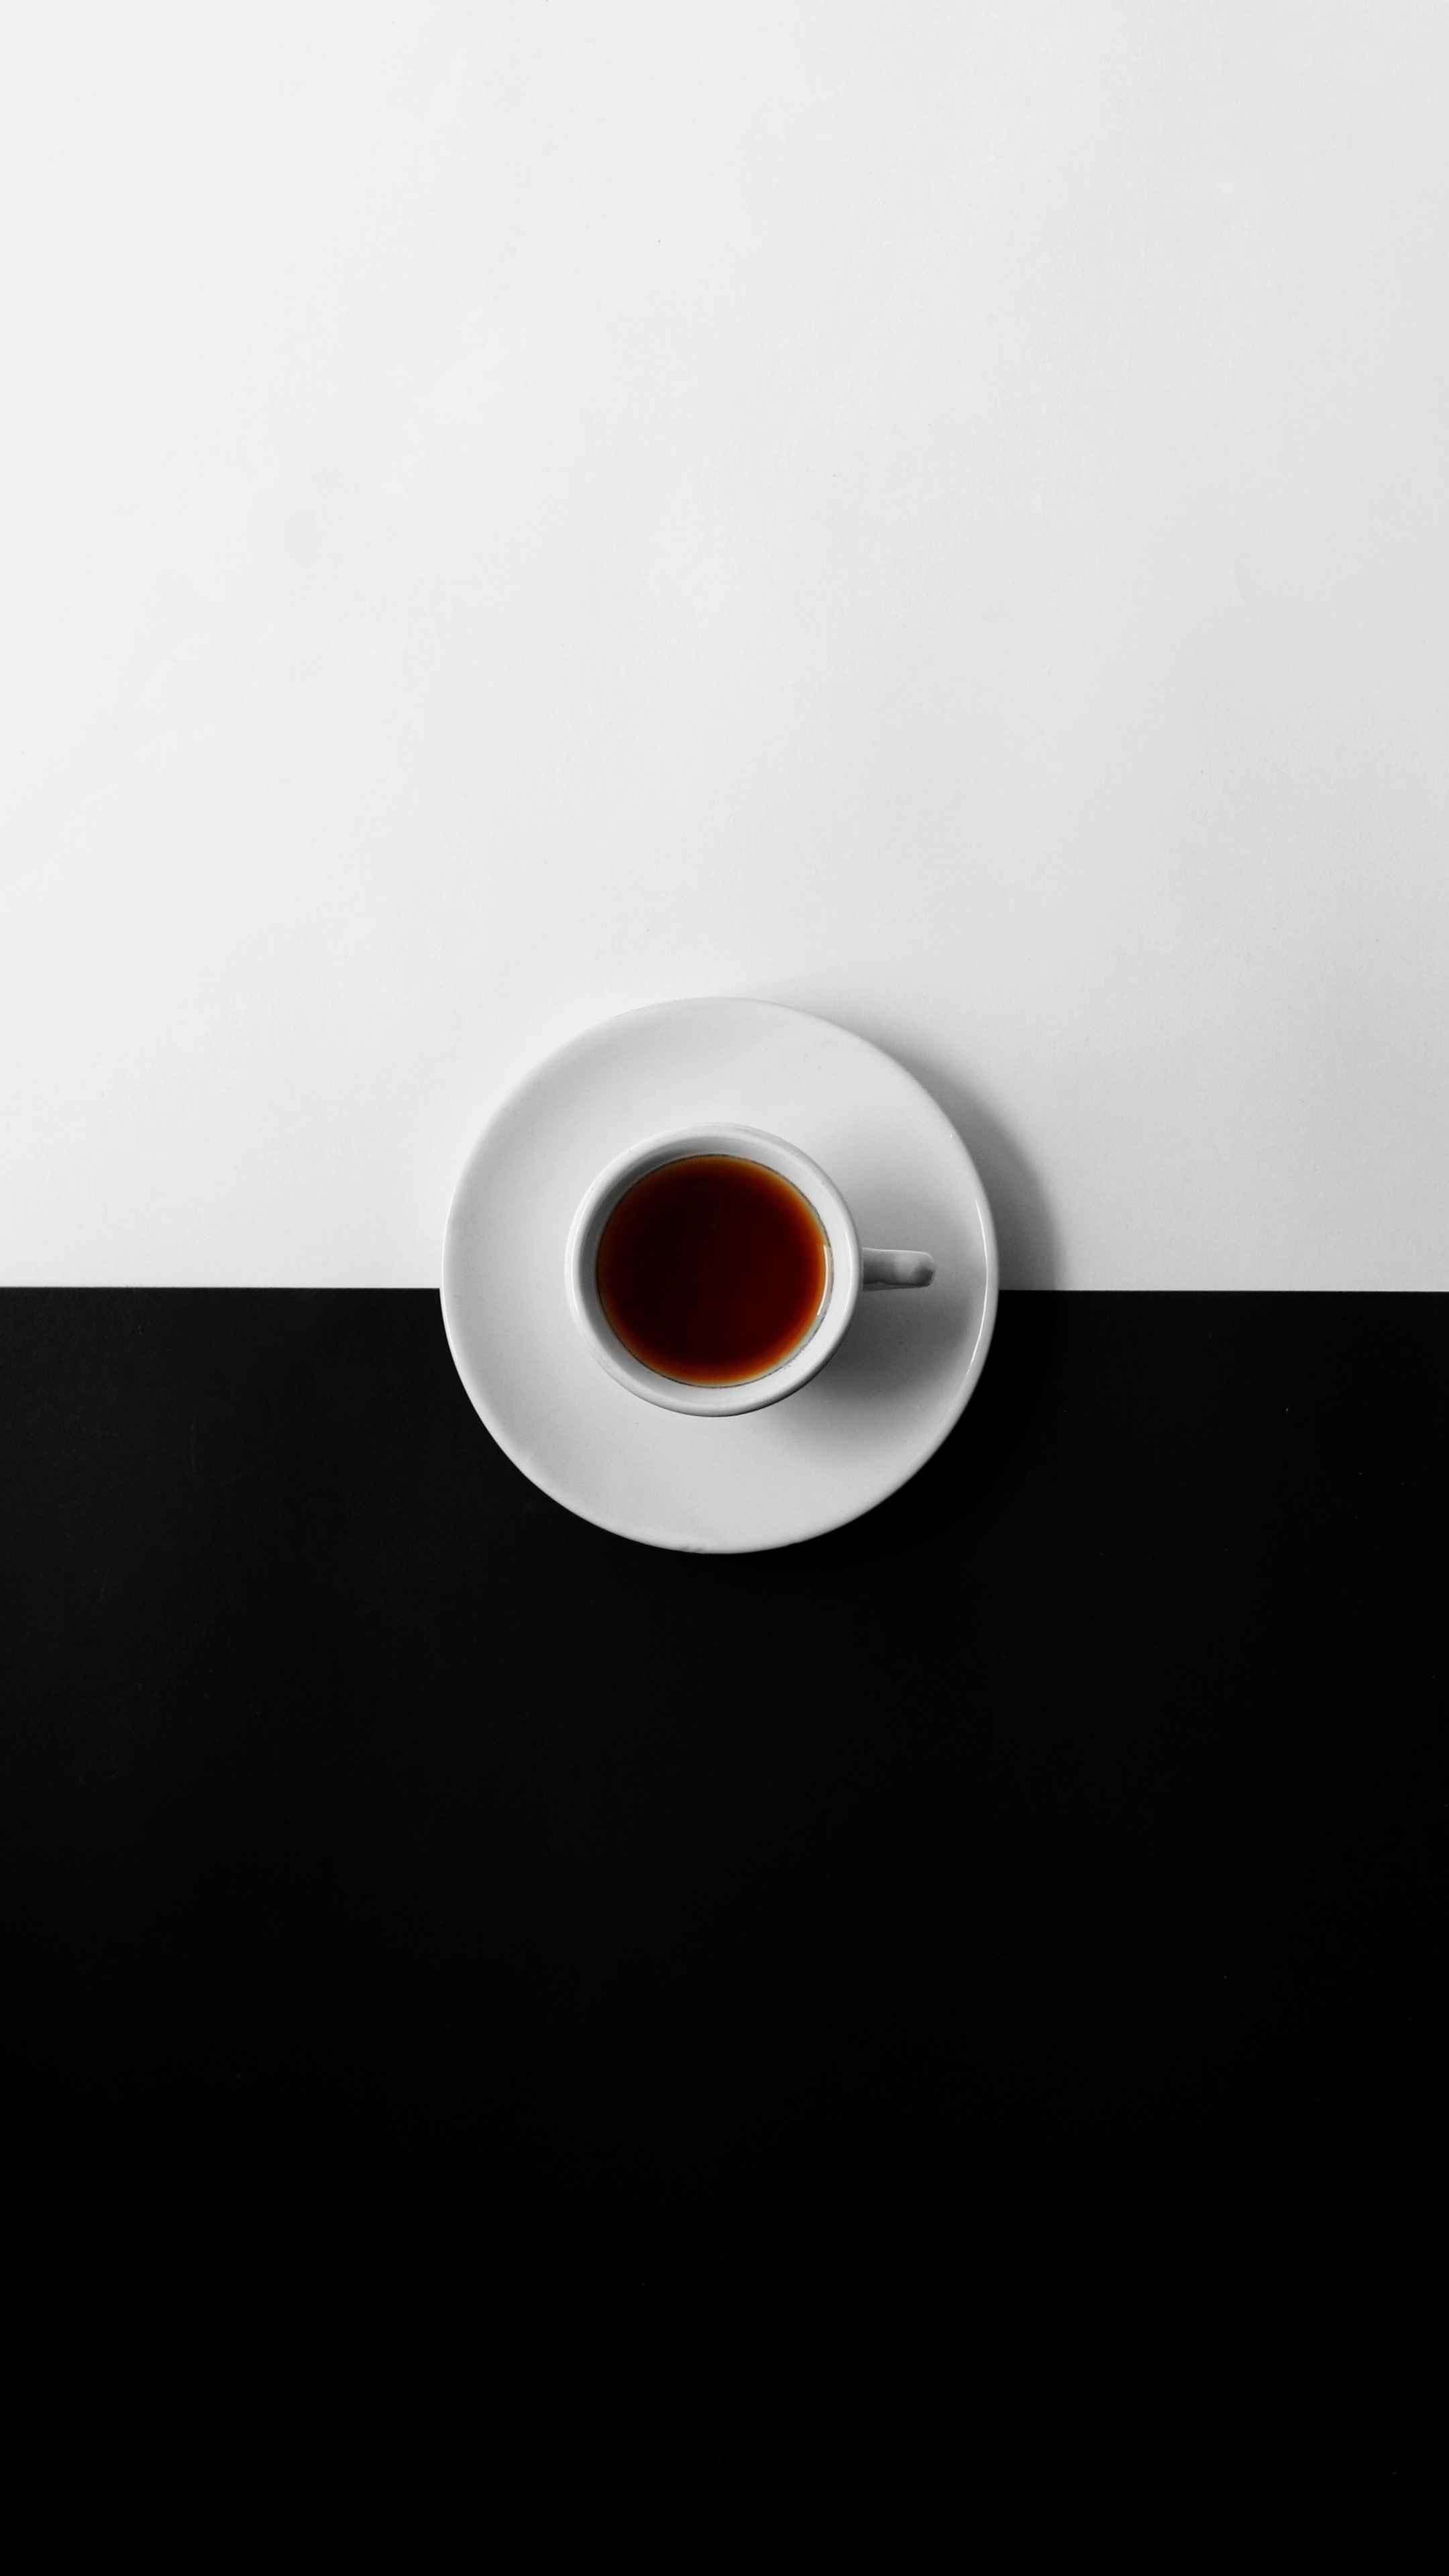 Cup of tea, Black and white, Minimal wallpaper, 2160x3840 4K Handy